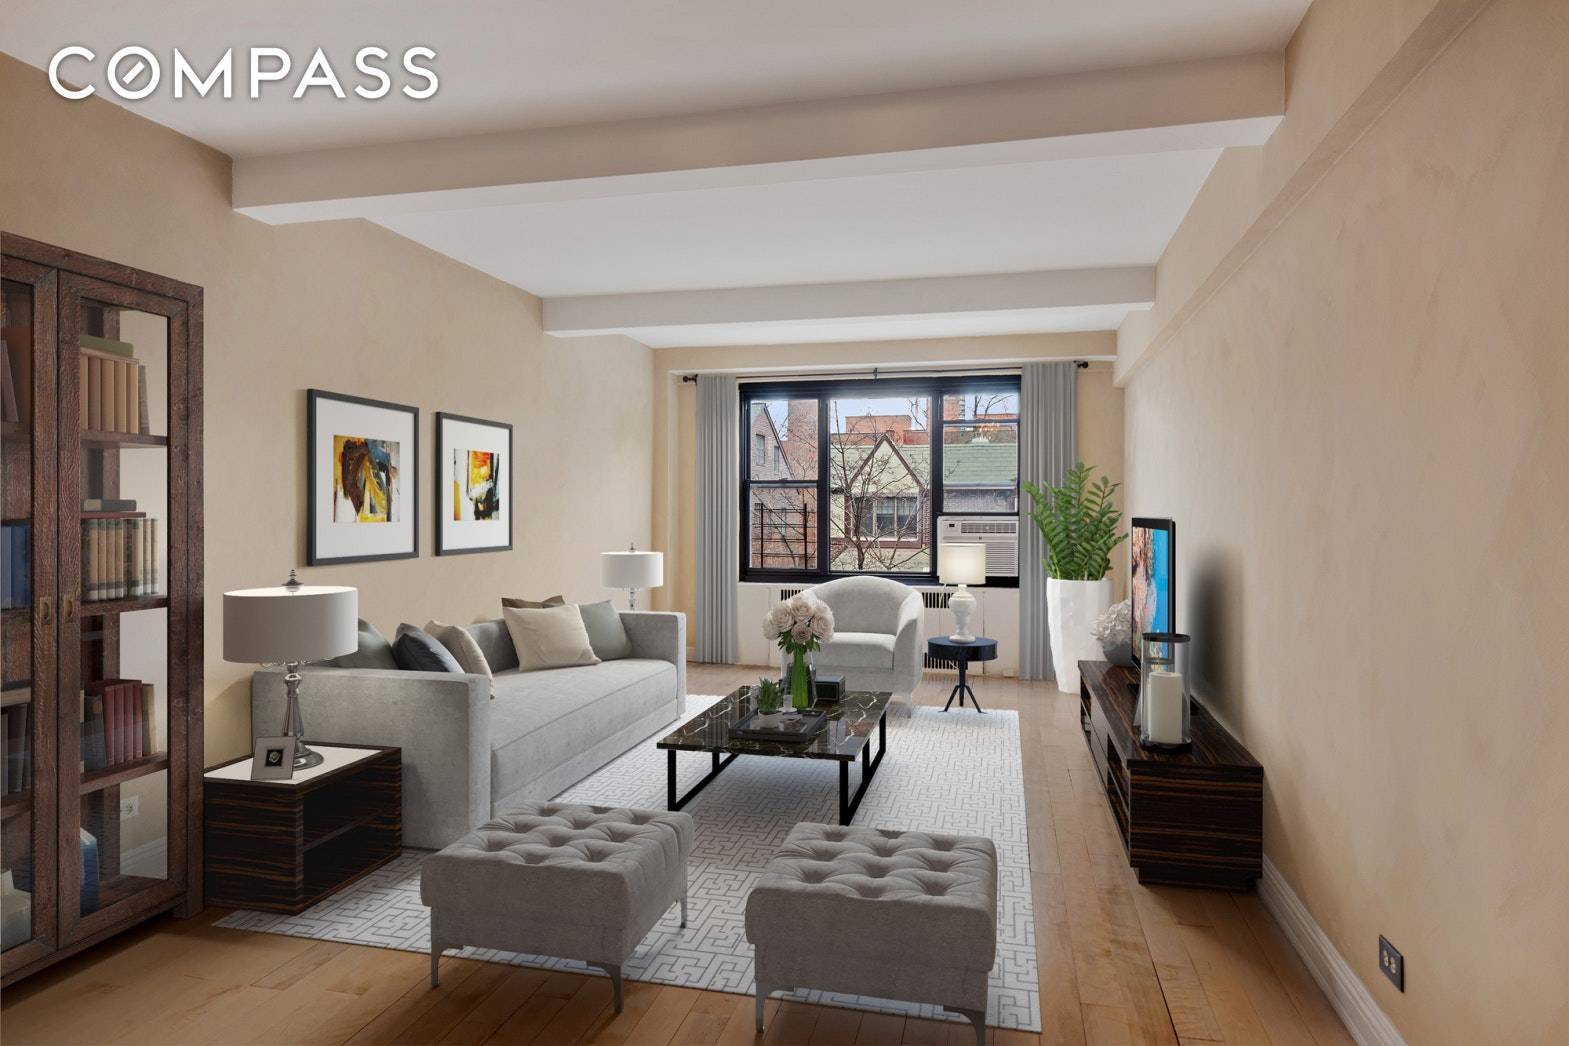 FULLY RENOVATED ONE BEDROOM WITH PICTURESQUE VIEWS Inwood s Park Terrace section is like nowhere else in Manhattan ; this home captures the charm and tranquility that draws New Yorkers ...